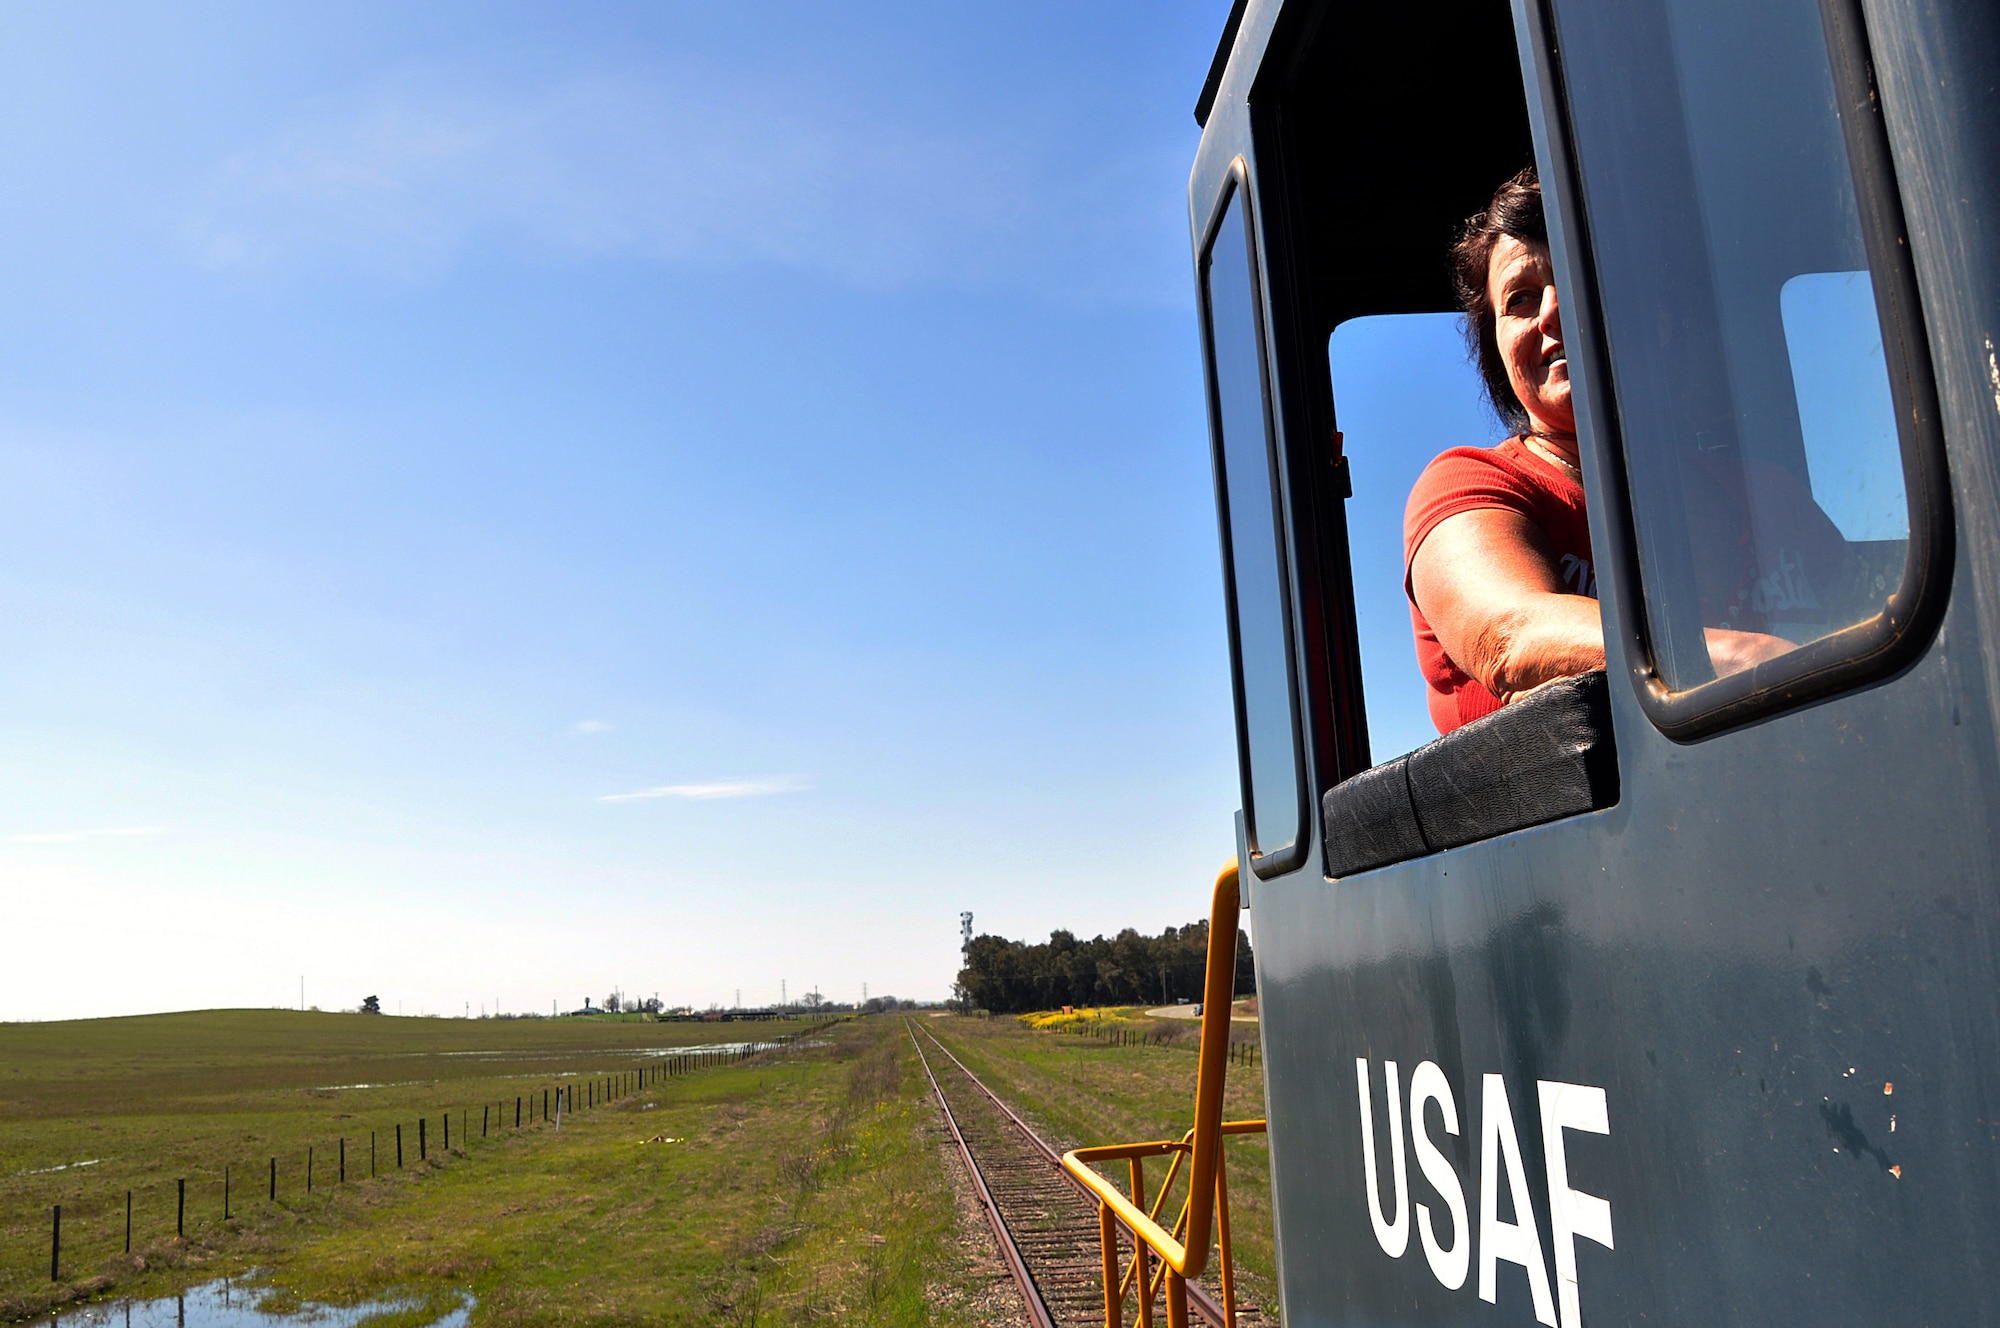 Susan Mertes, 9th Support Division locomotive engineer, operates a locomotive at Beale Air Force Base, Calif., March 21, 2012. Mertes has worked in many positions on base since 1979. (U.S. Air Force photo by Airman 1st Class Andrew Buchanan/Released)